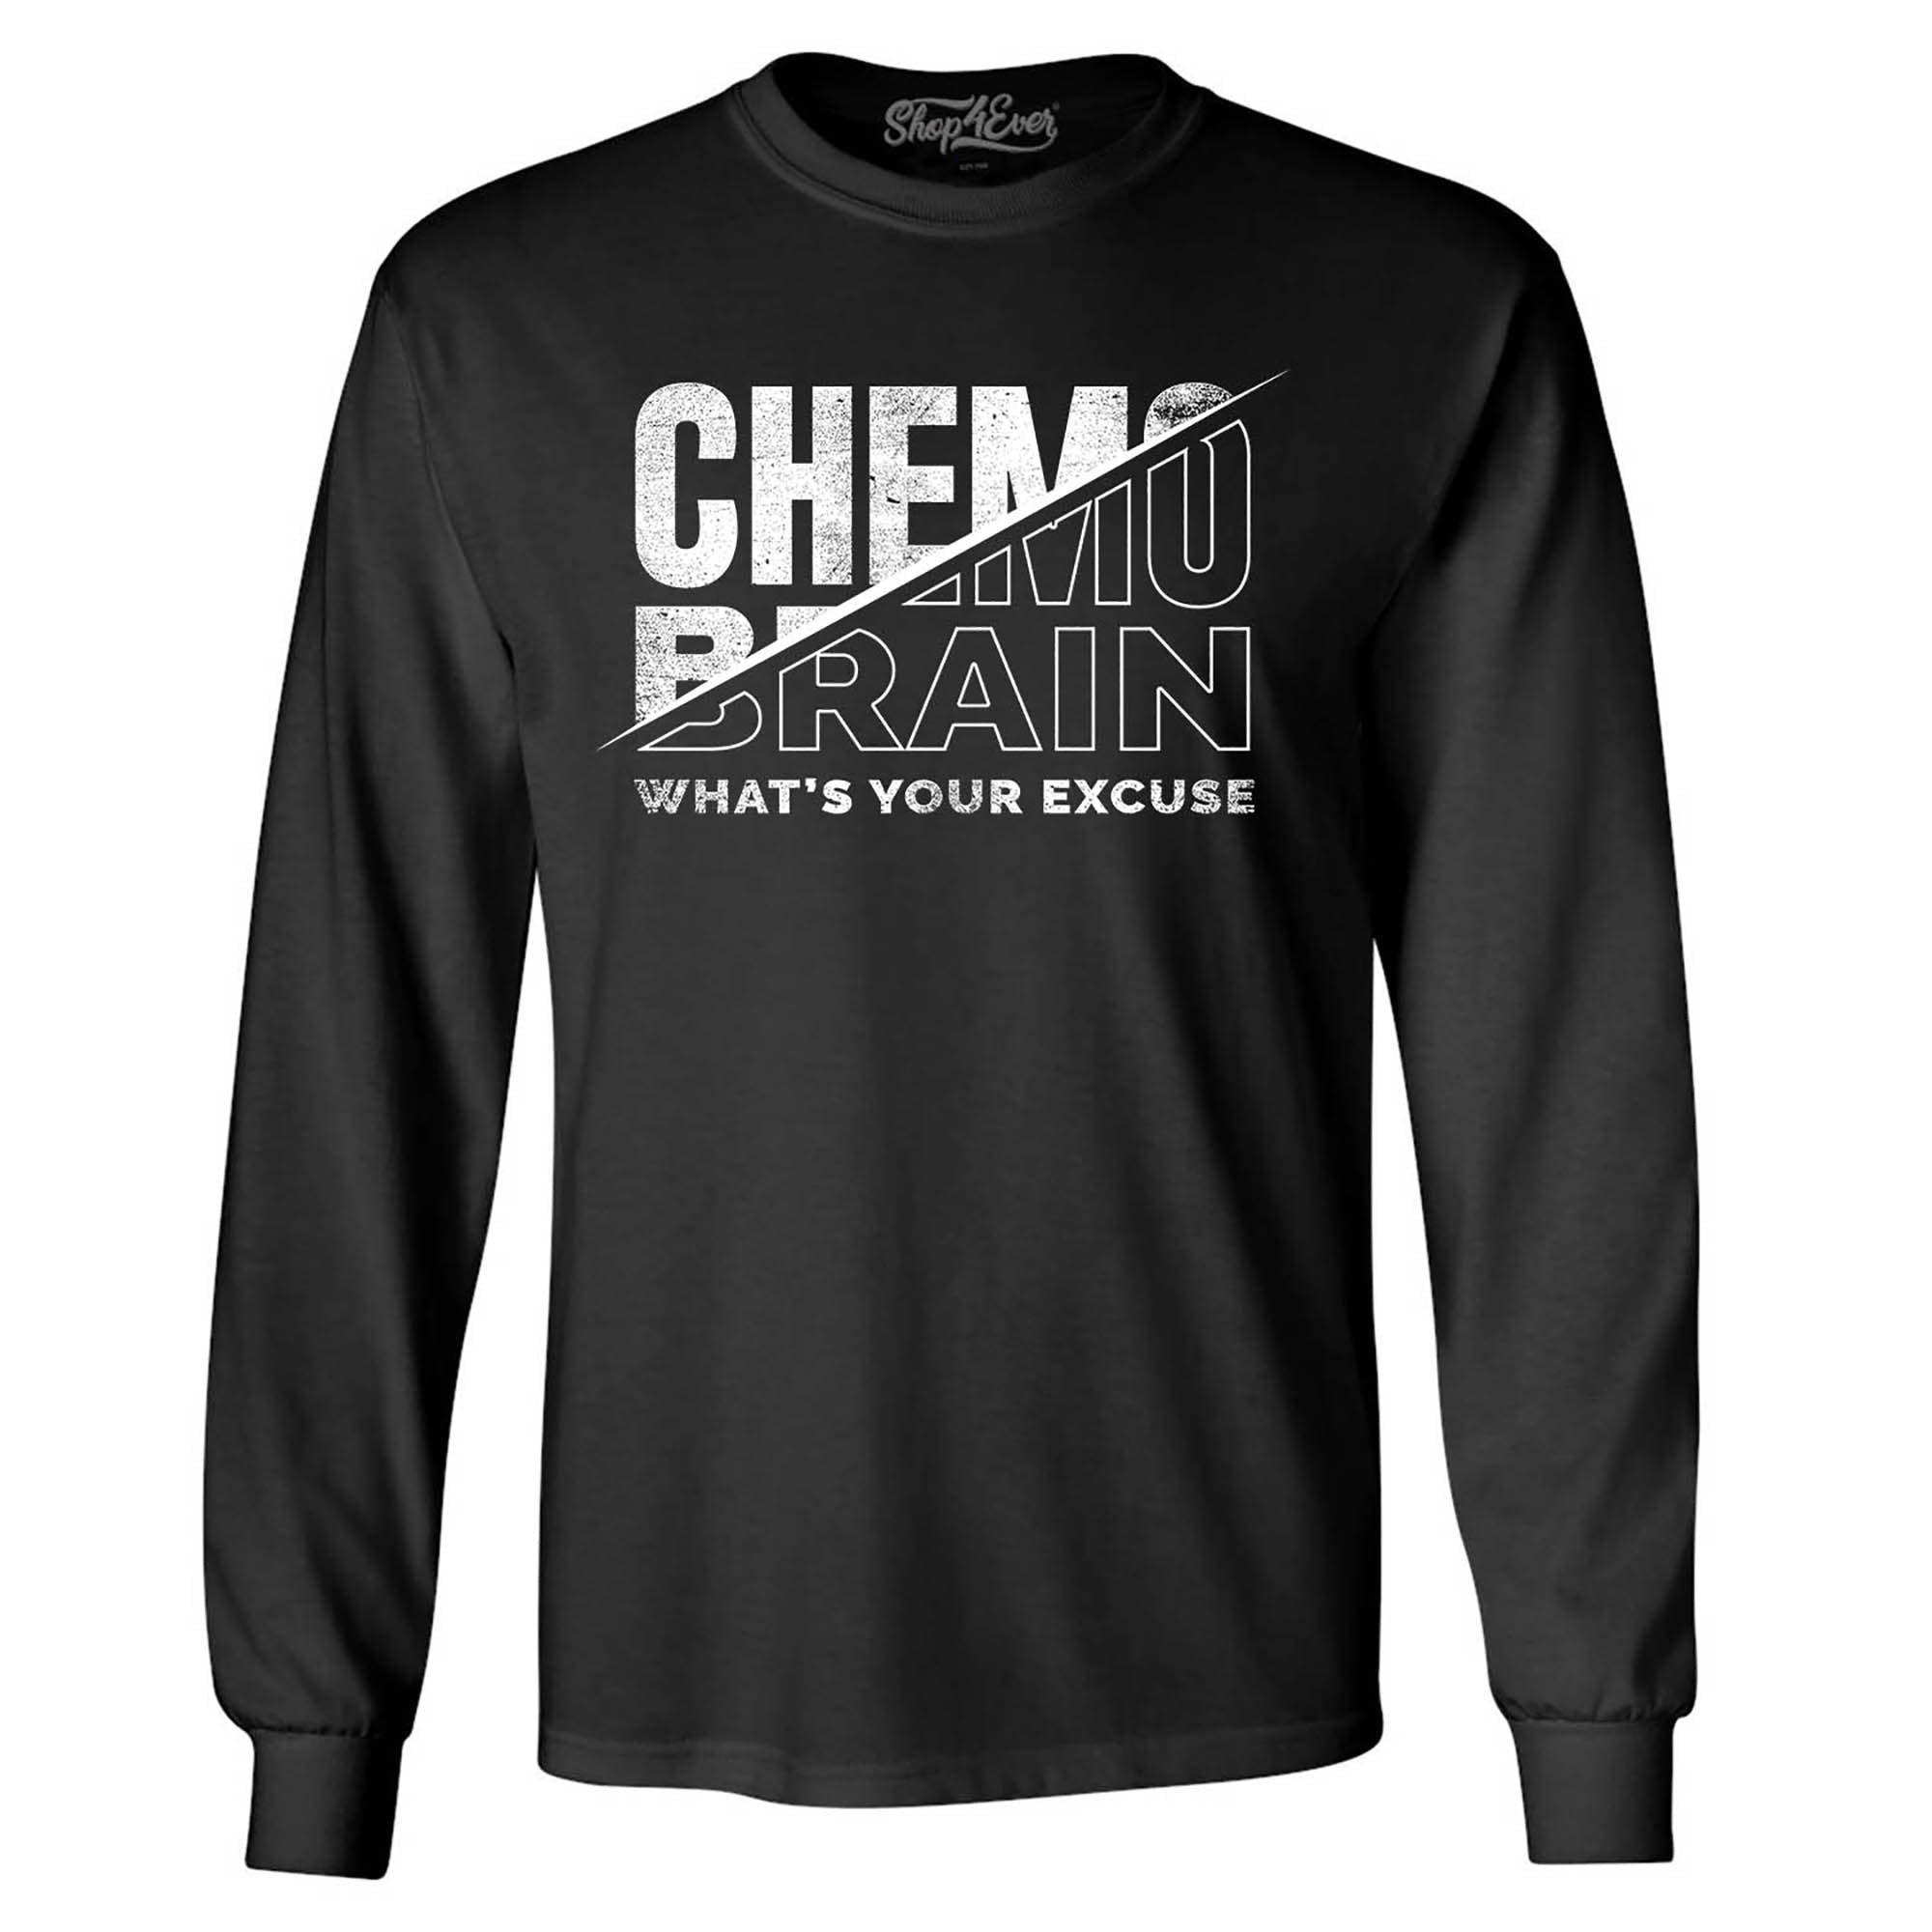 Chemo Brain What's Your Excuse? Funny Long Sleeve Shirt